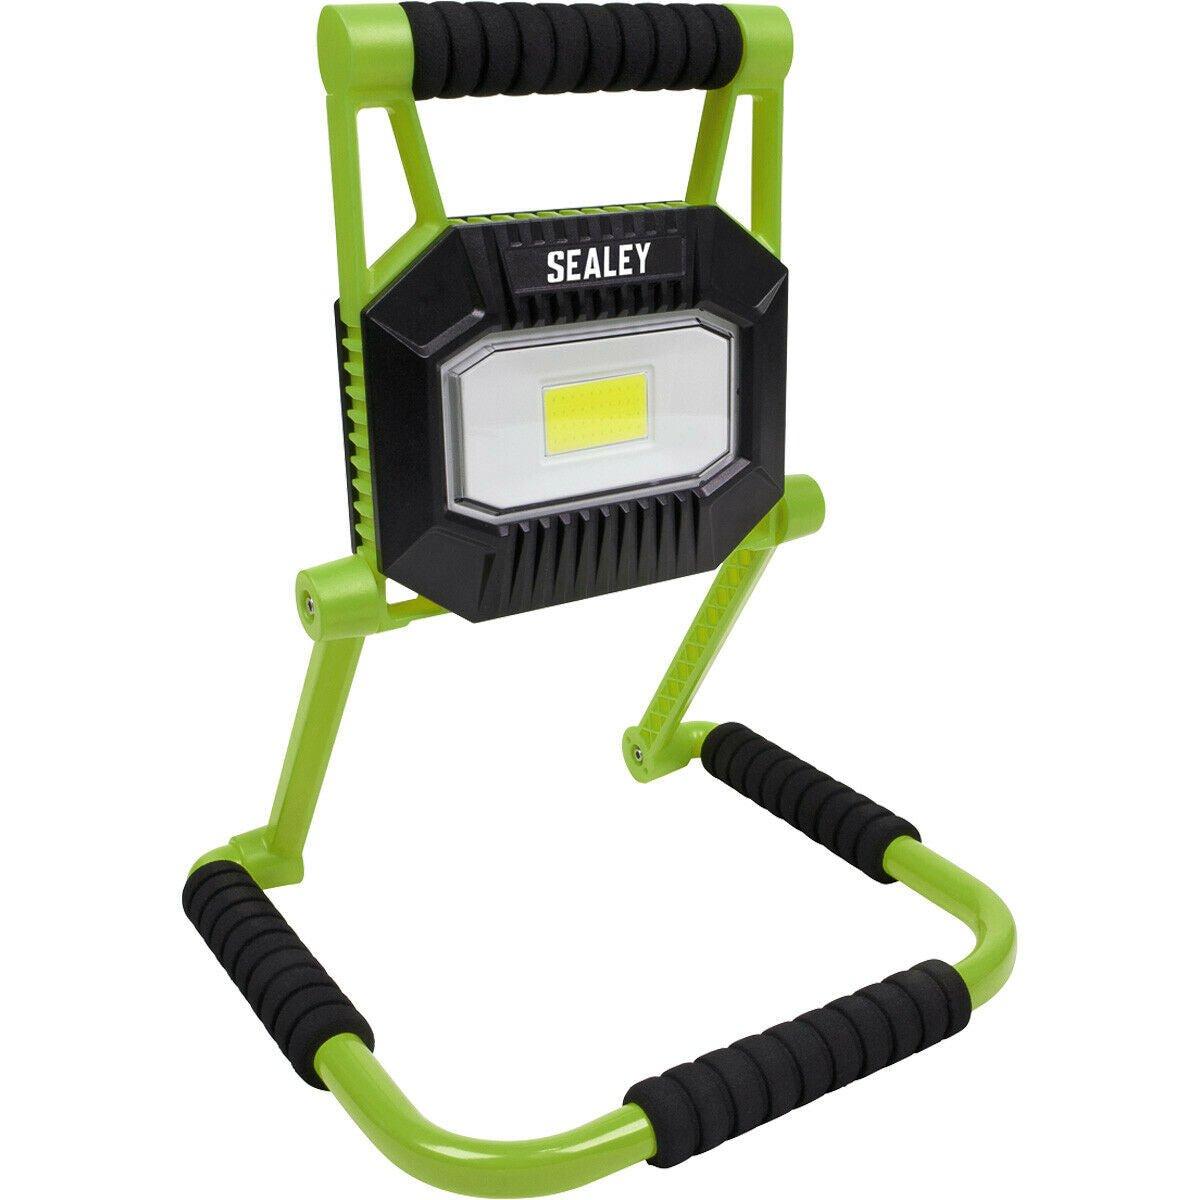 Rechargeable Portable Floodlight - 20W COB LED - IP67 Rated - Adjustable Swivel